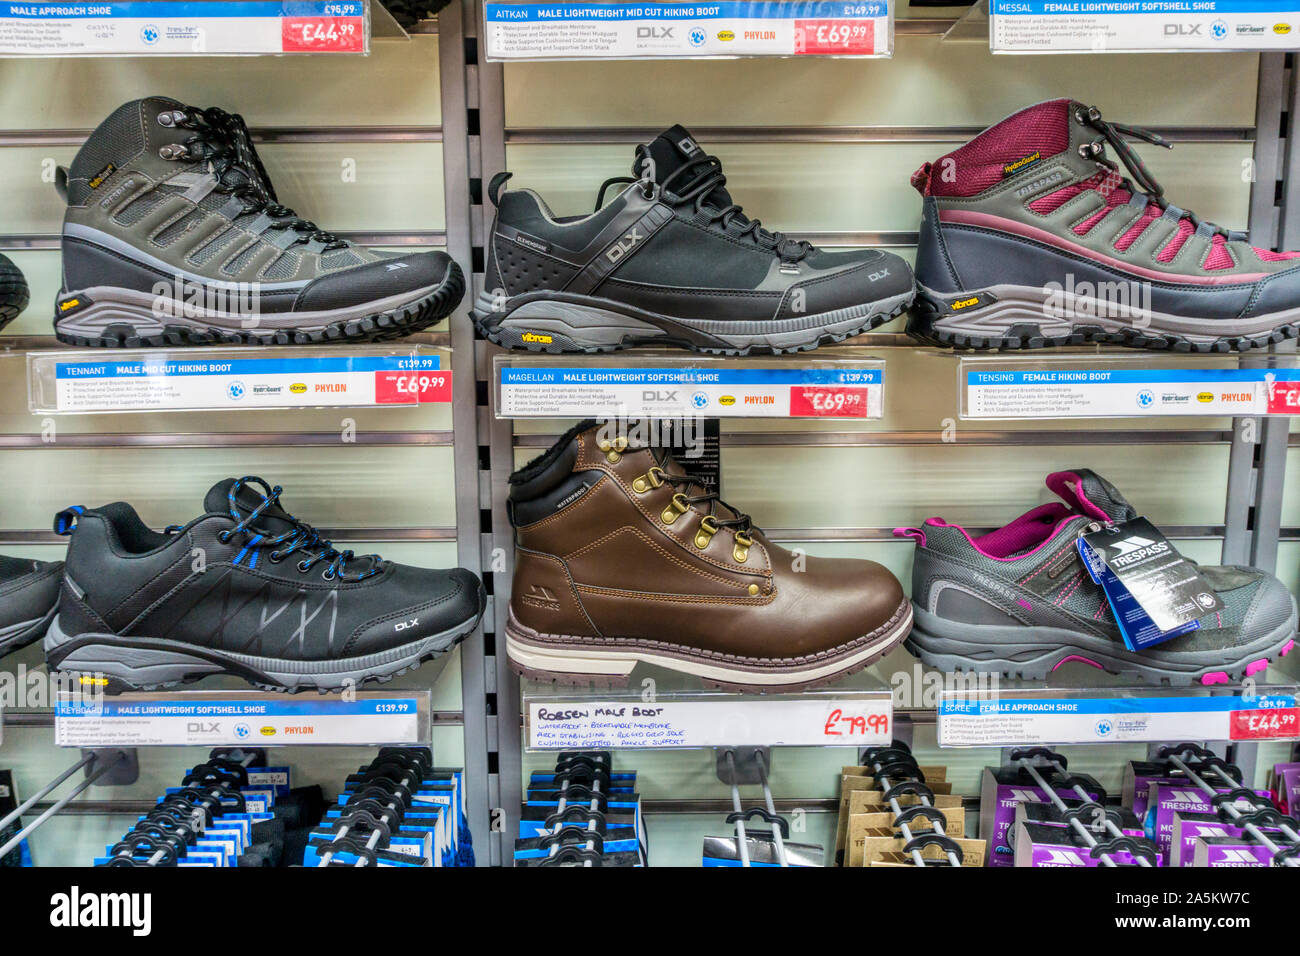 Hiking boots for sale in an outdoor clothing shop. Stock Photo